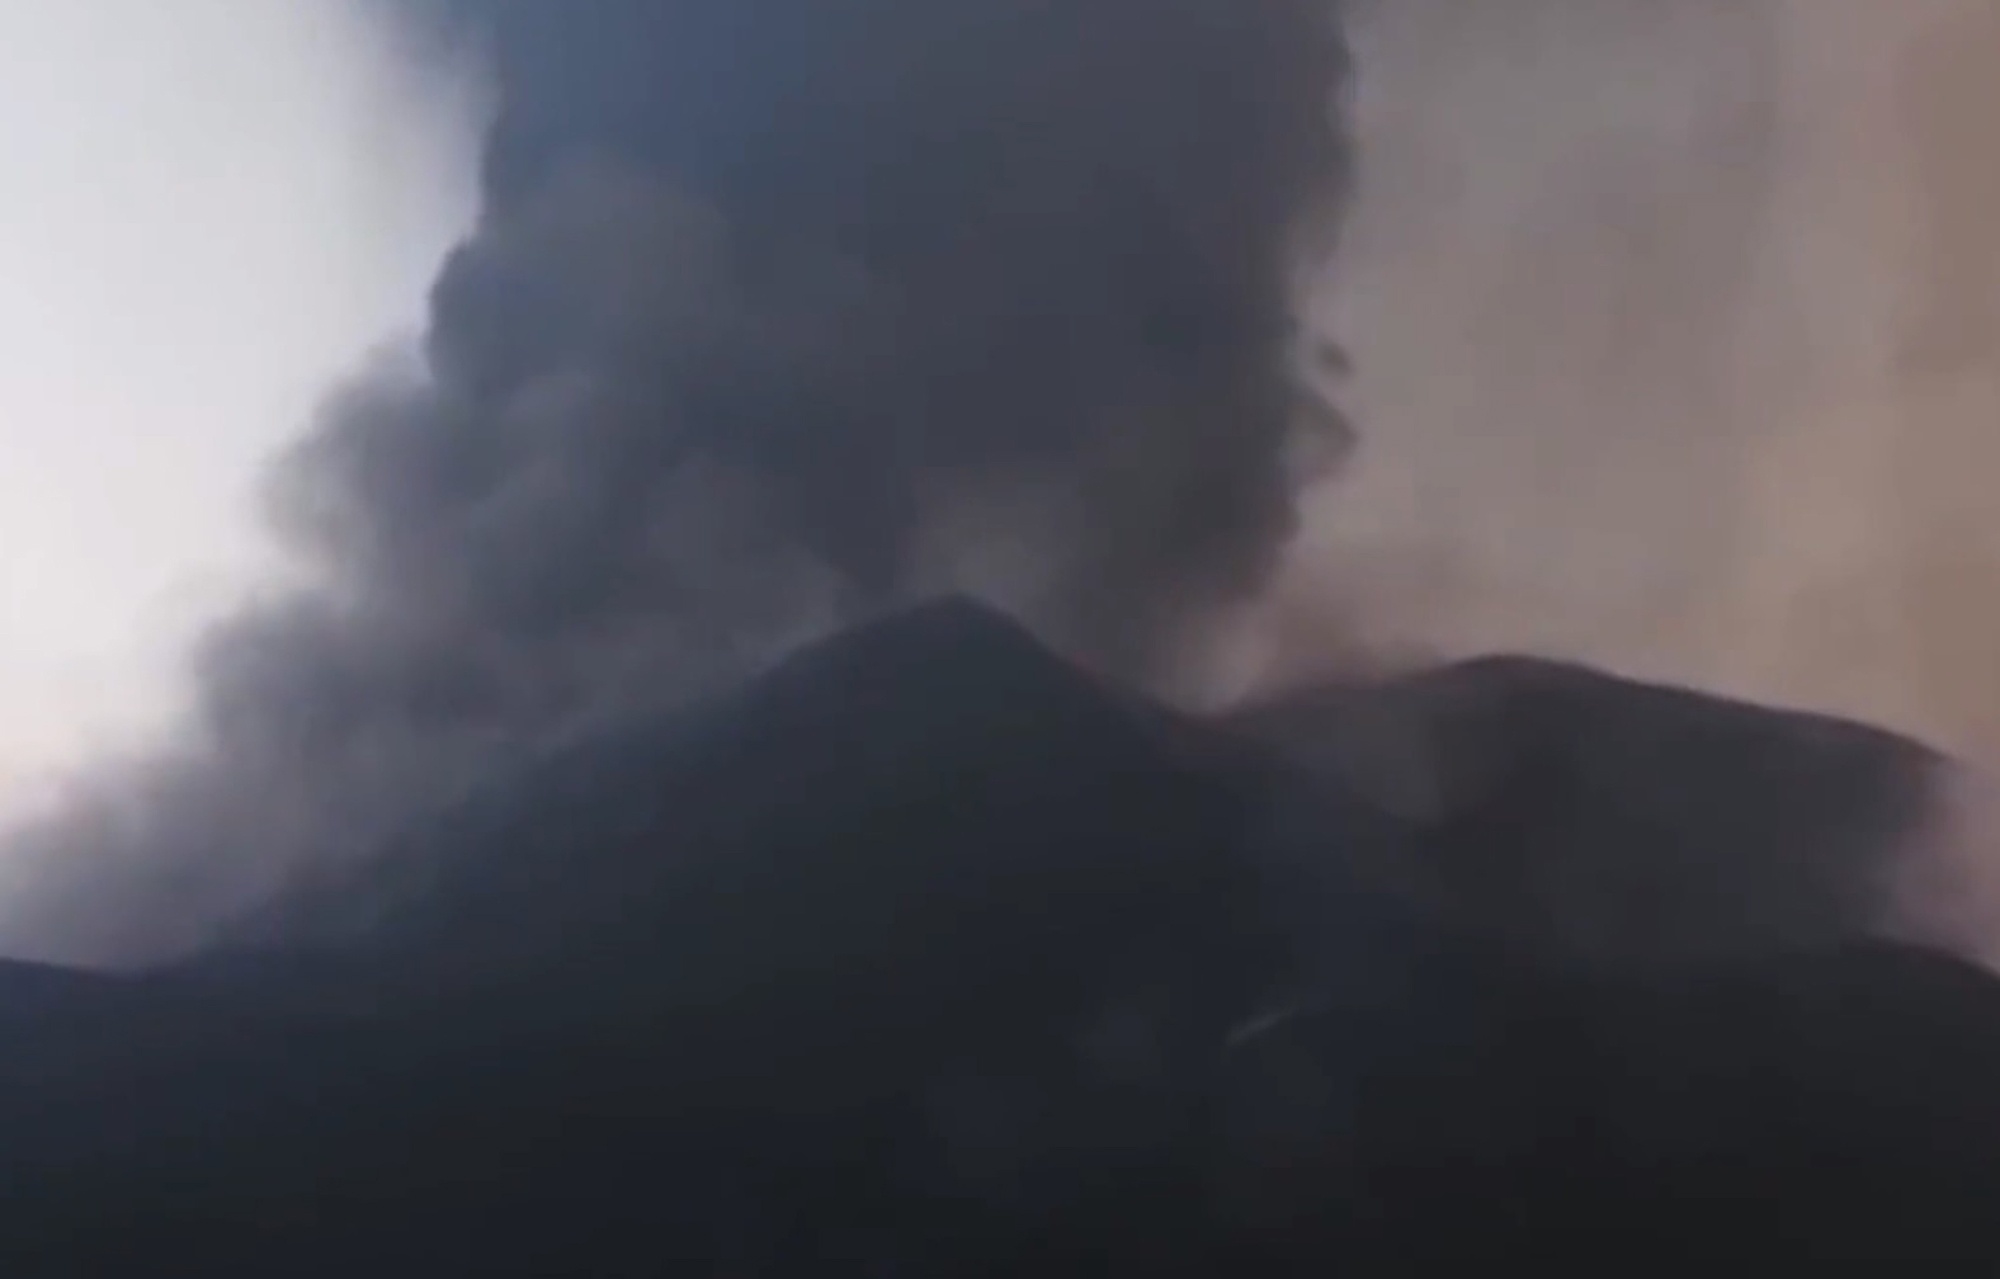 Read more about the article La Palma Volcano Intensifies With Giant Ash Cloud Grounding Flights After Politician Suggests Bombing It